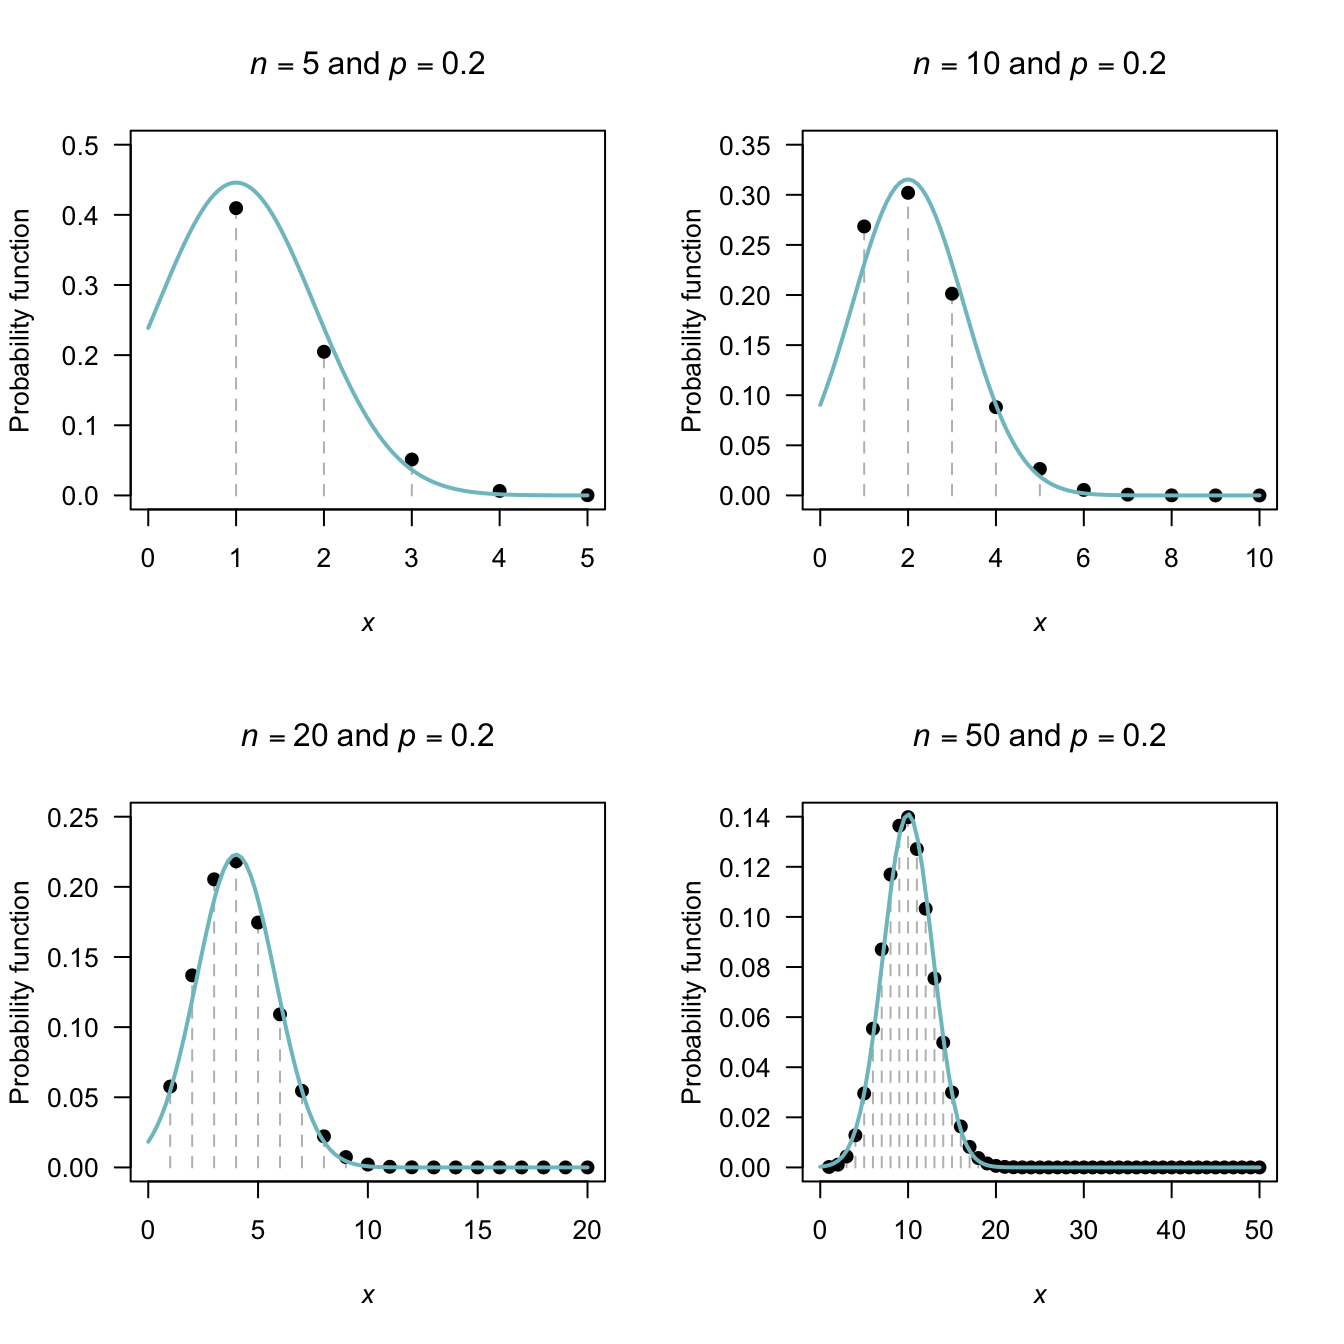 The normal distribution approximating a binomial distribution. The guidelines suggest the approximation should be good when $np \ge 5$ and $n (1 - p) \ge 5$; this is evident from the pictures. In the top row, a significant amount of the approximating normal distribution even appears when $Y < 0$.